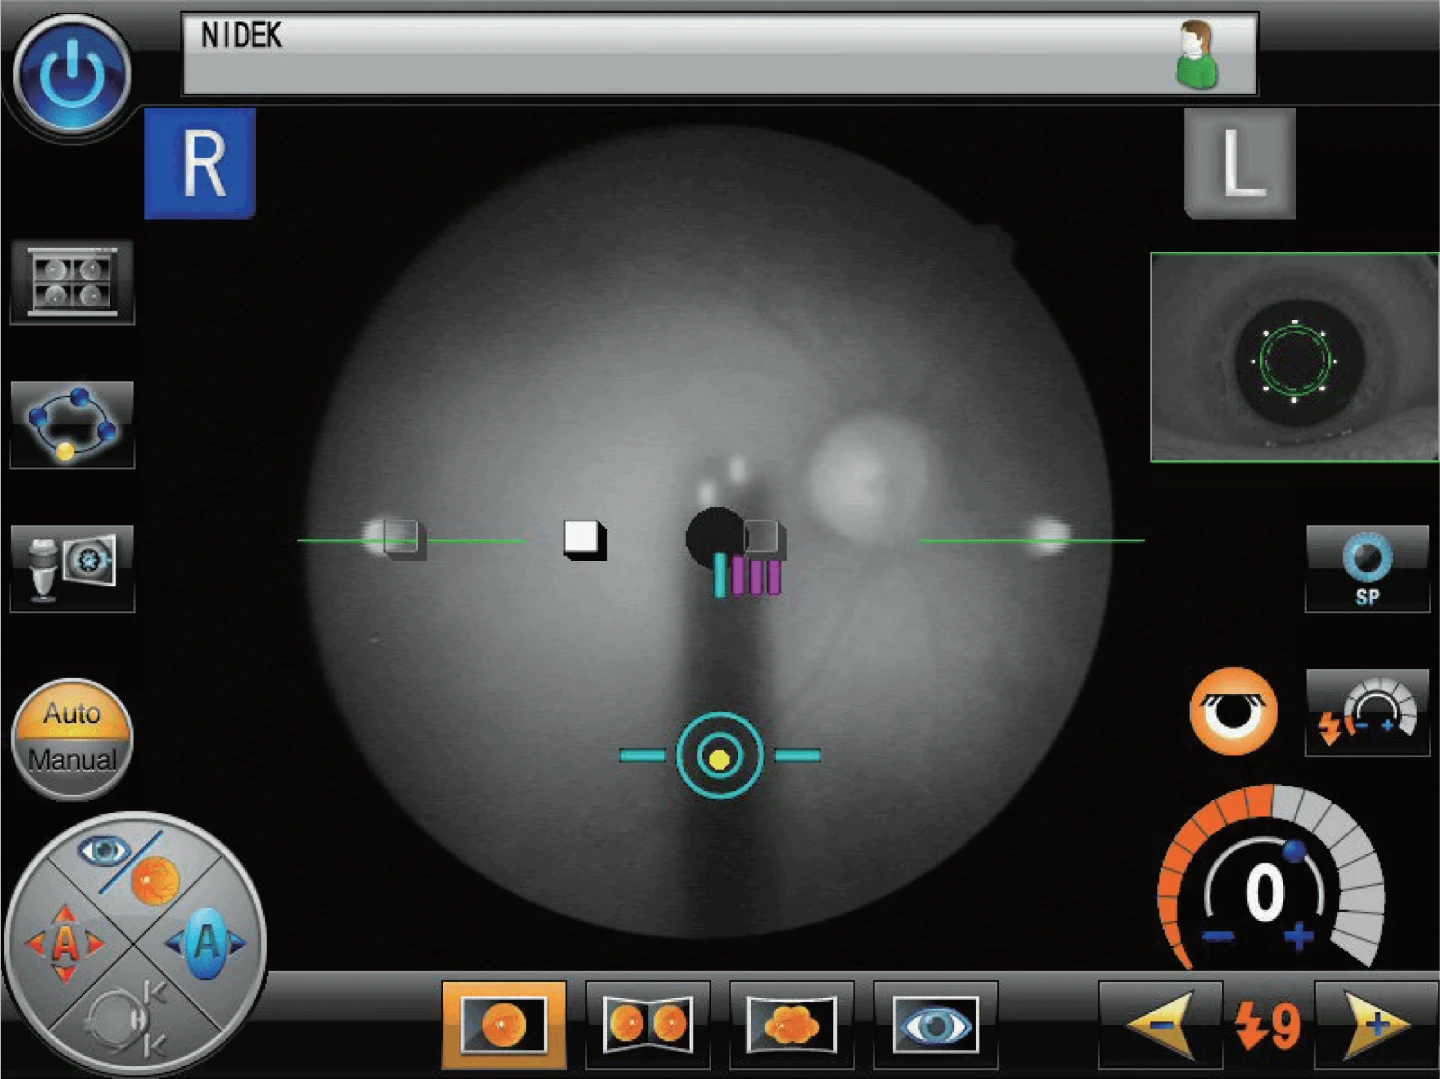 A Display Screen Of A Nidek Ophthalmic Device Shows Live Imaging Of An Eye. The Central Circular Section Displays A Gray-Scale Eye Scan With Various Markers And Measurements. Surrounding The Main Image Is A User Interface With Various Controls And Icons.